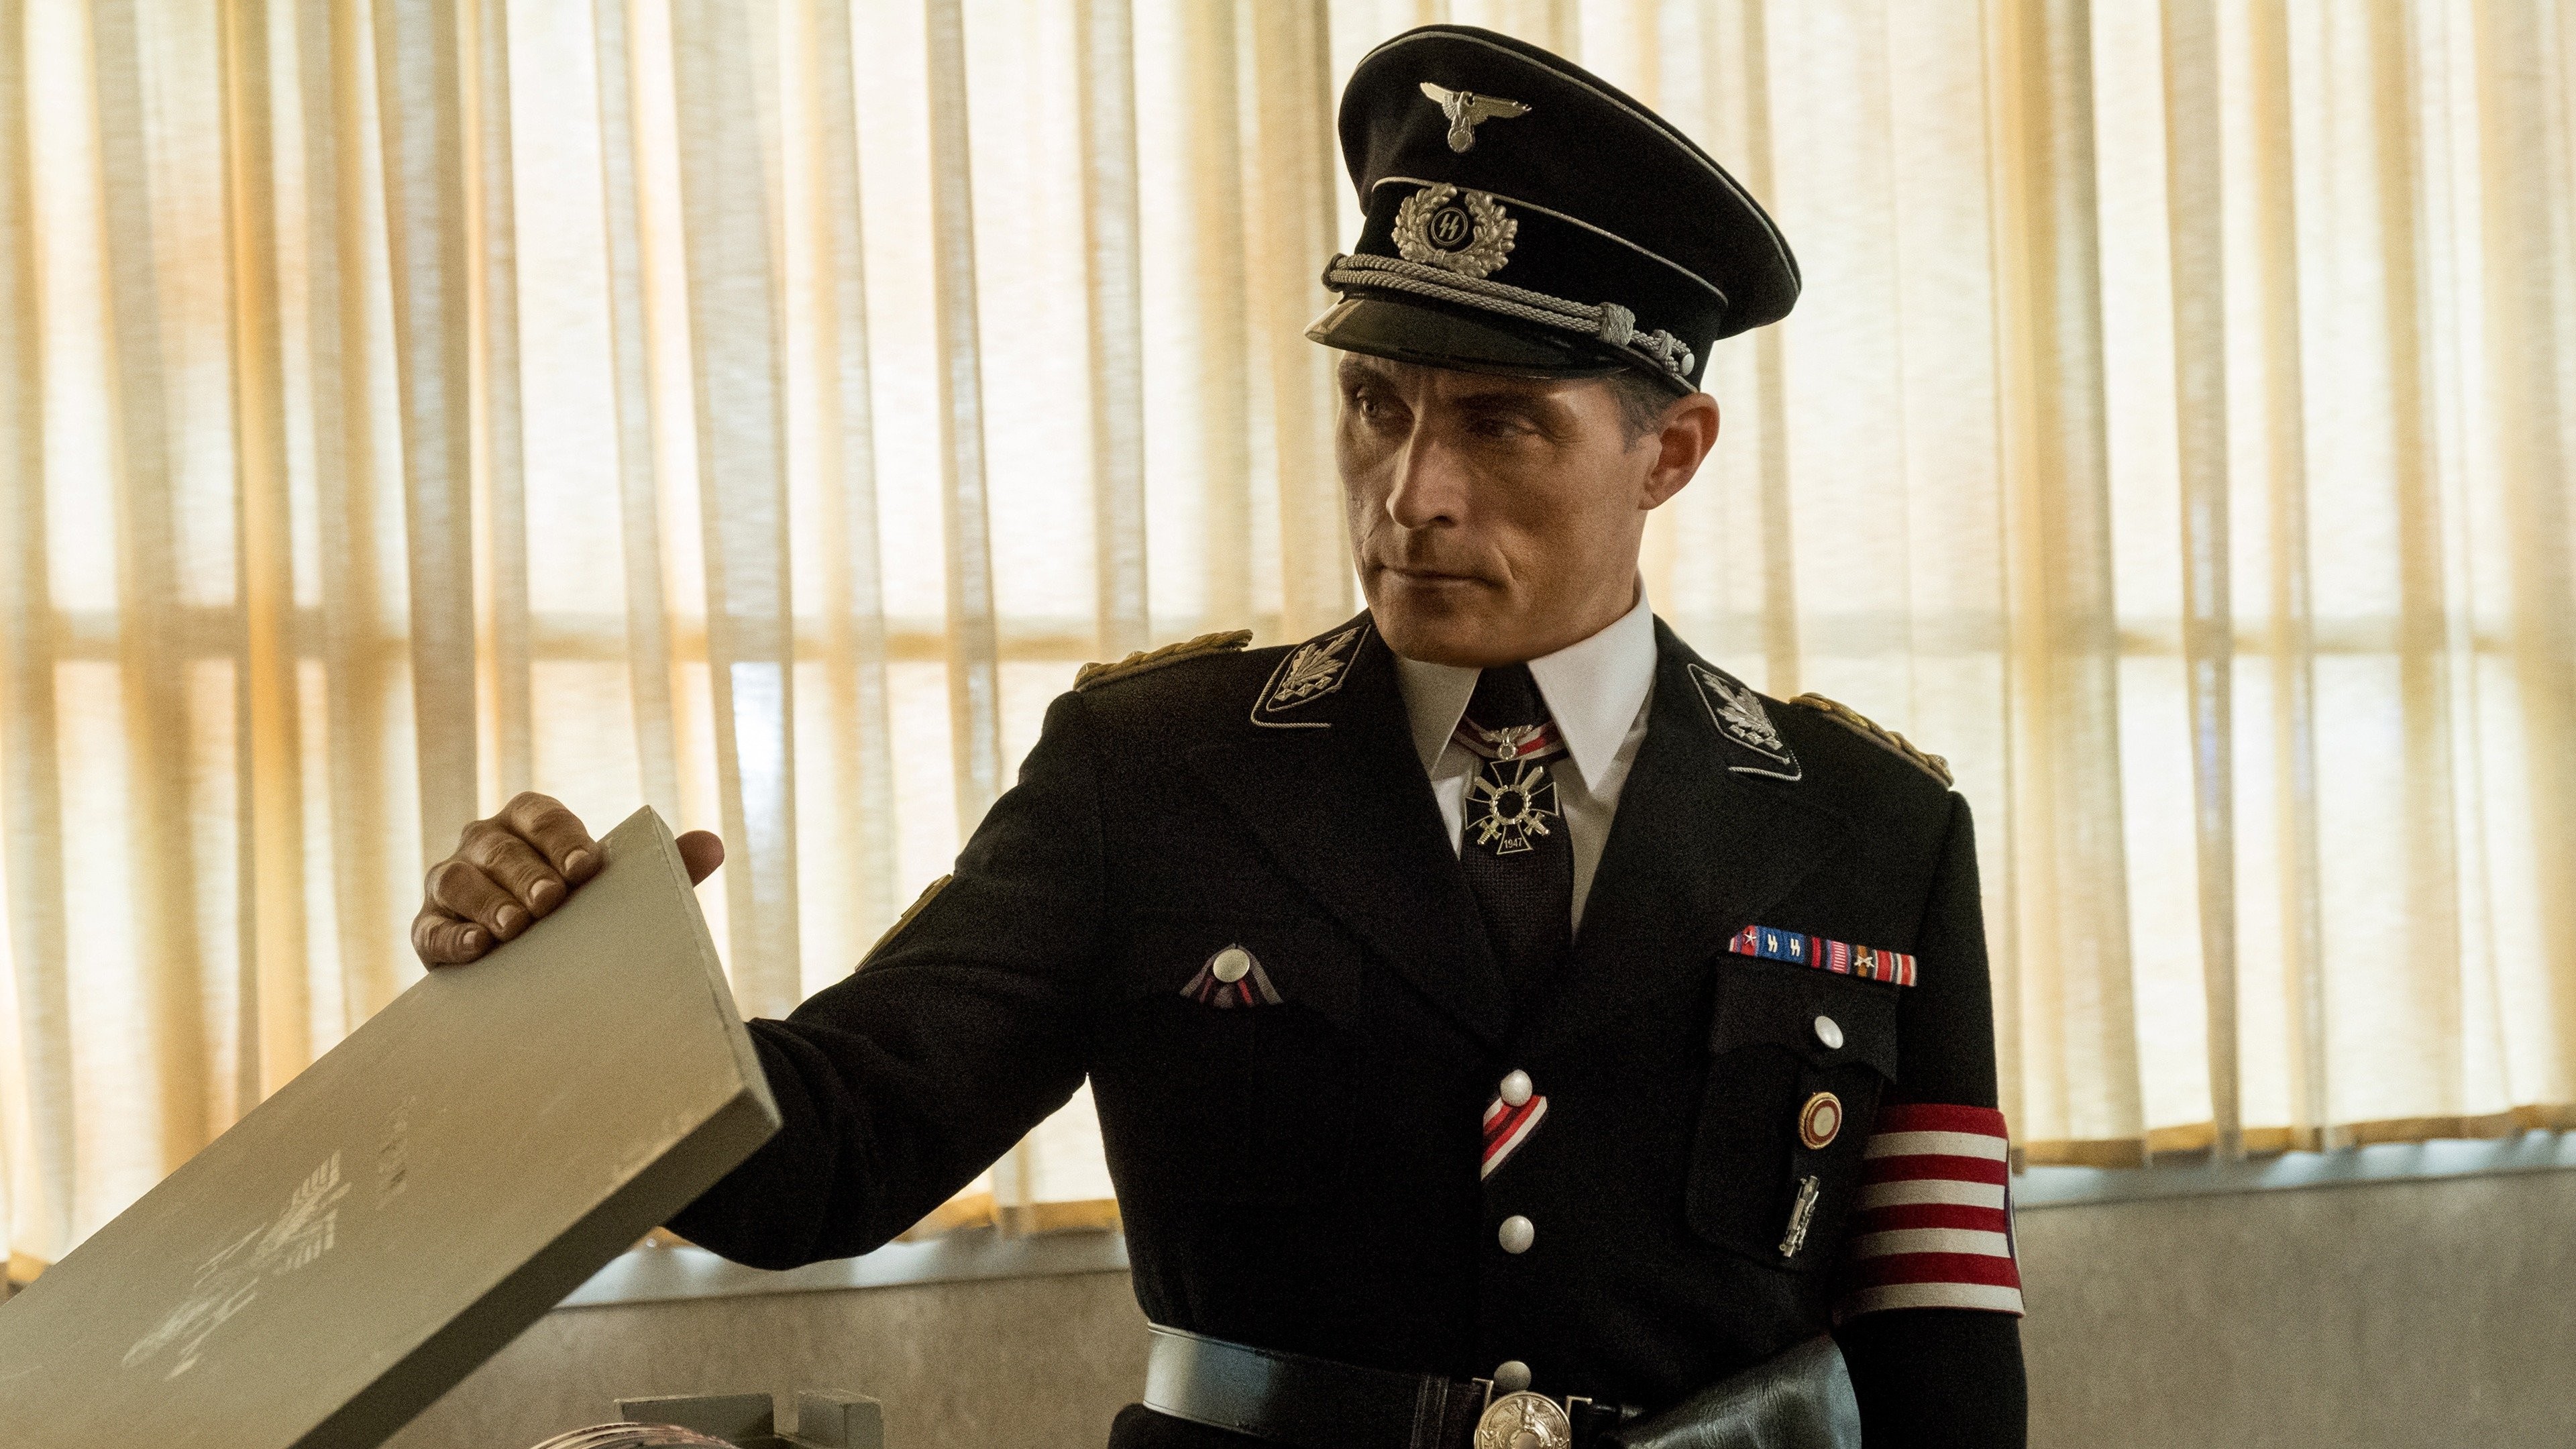 The Man in the High Castle Pictures - Rotten Tomatoes